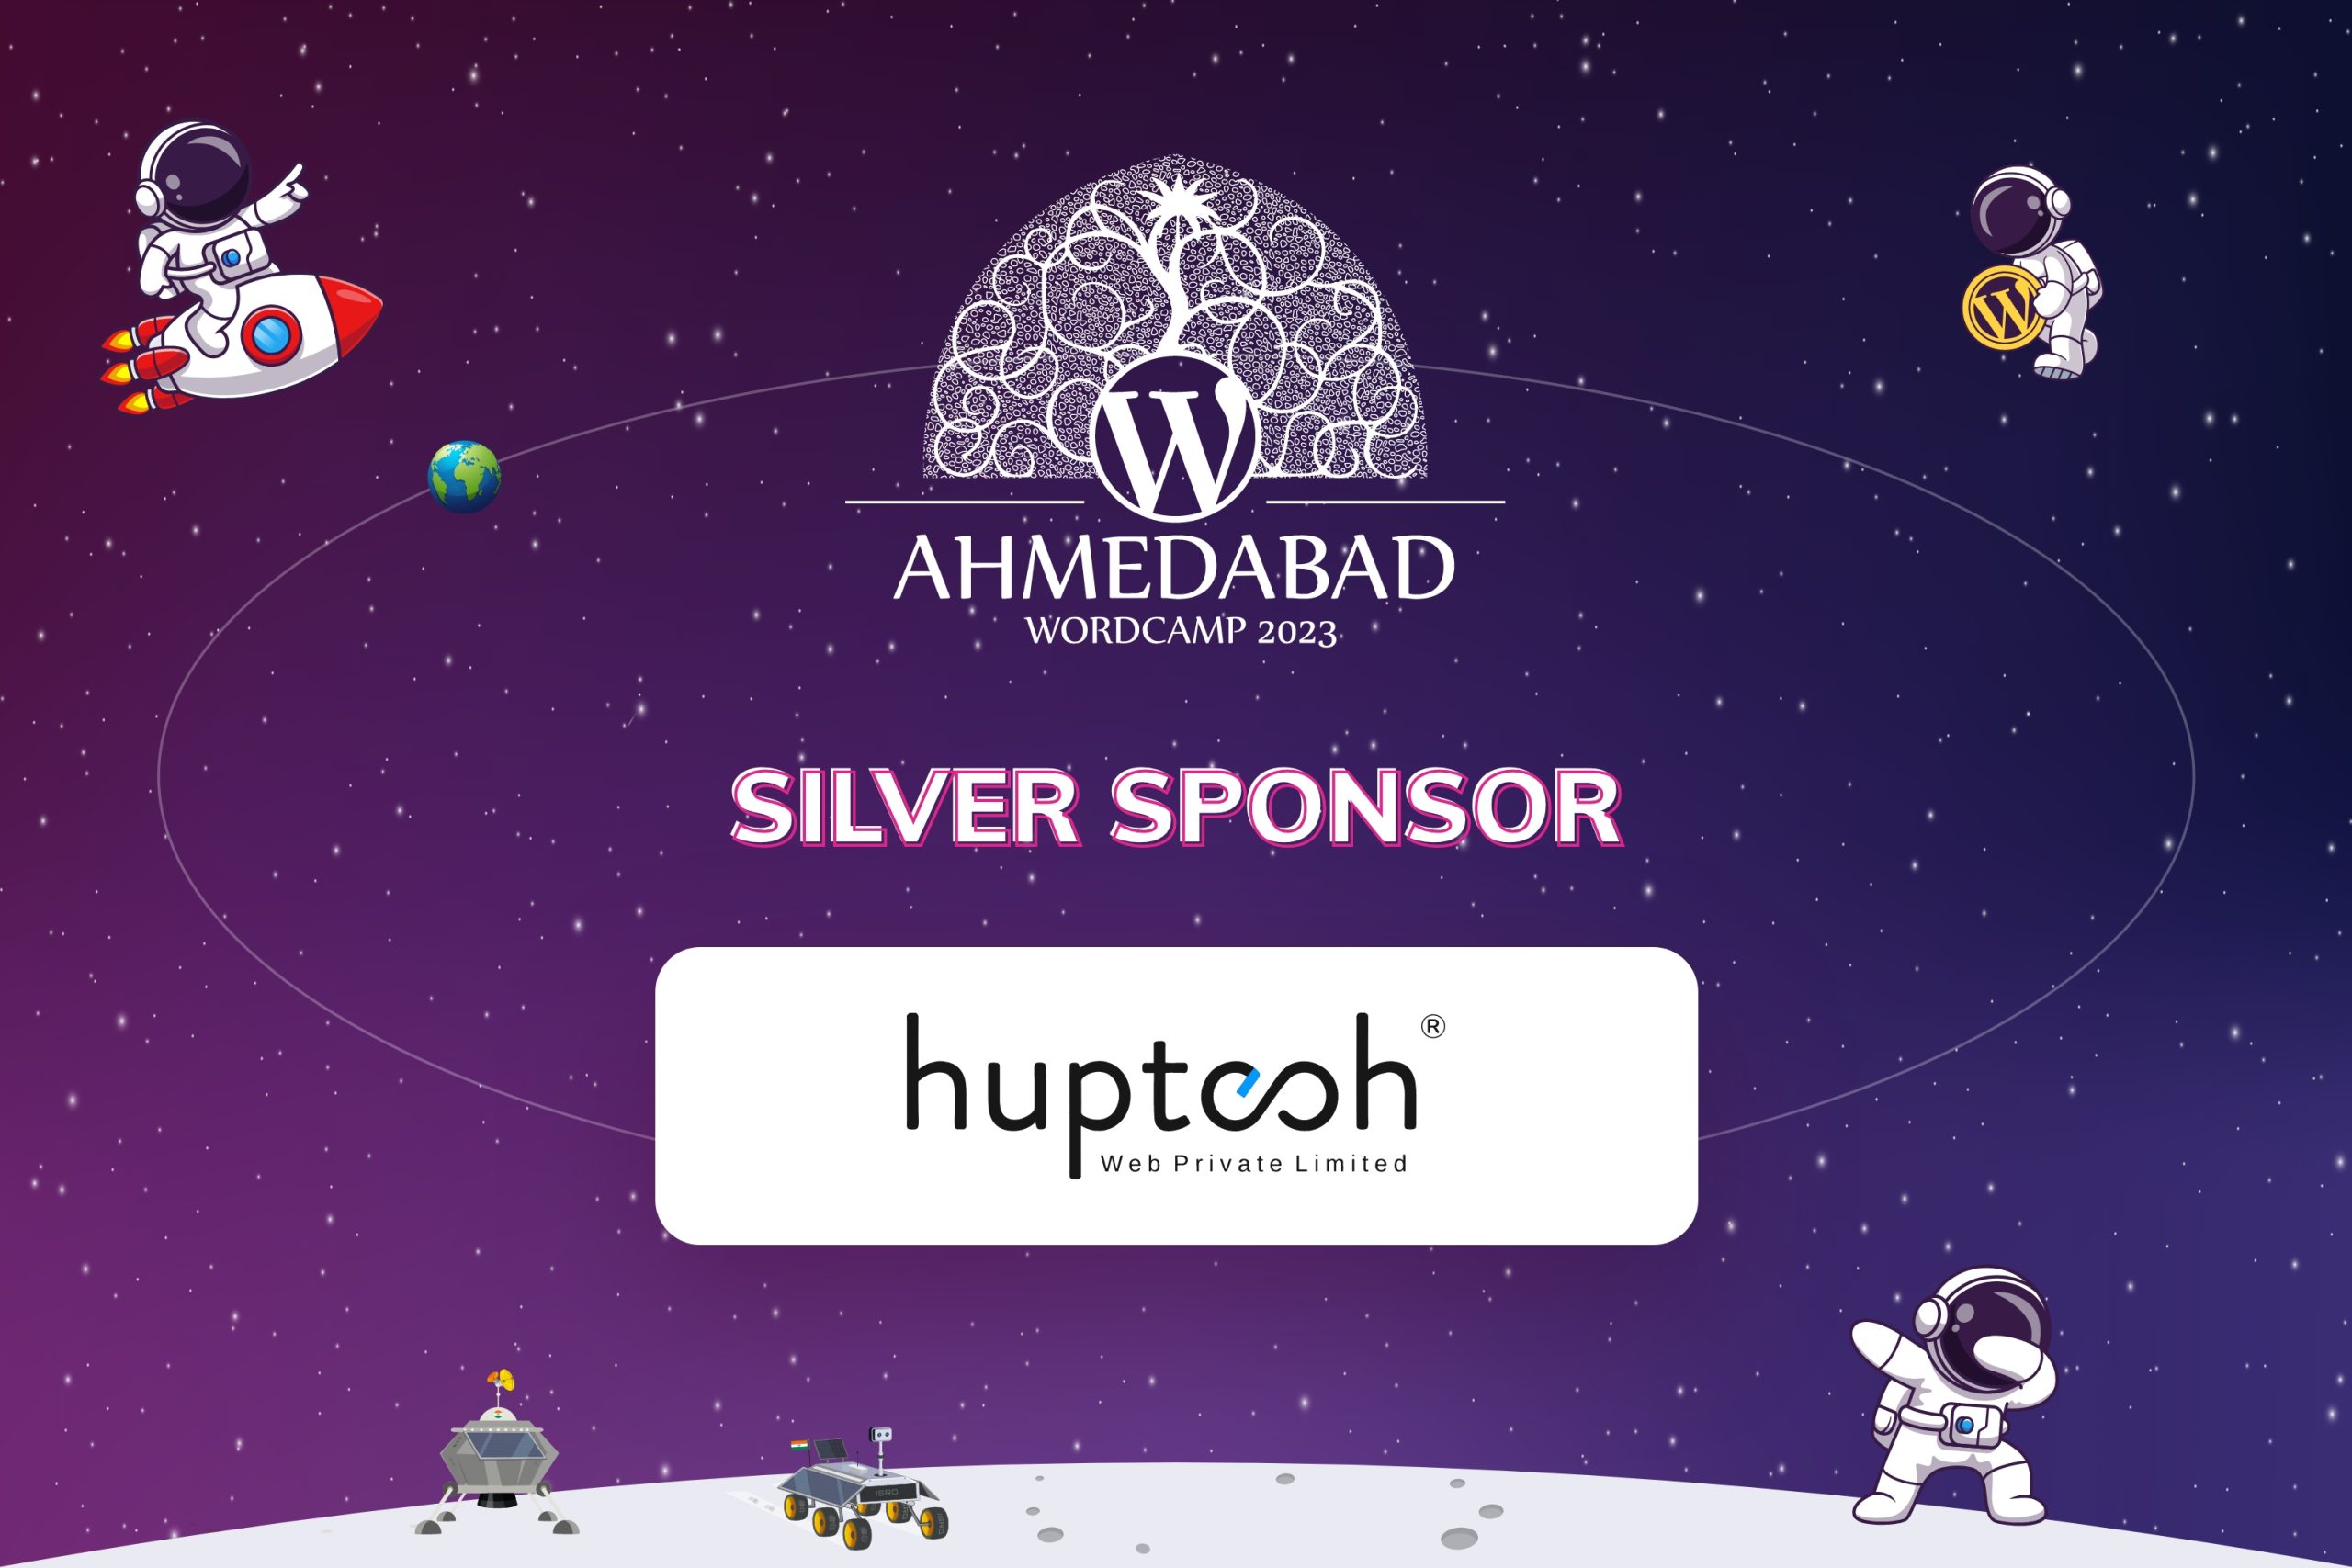 Thank You Huptech Web Private Limited, for being our Silver Sponsor